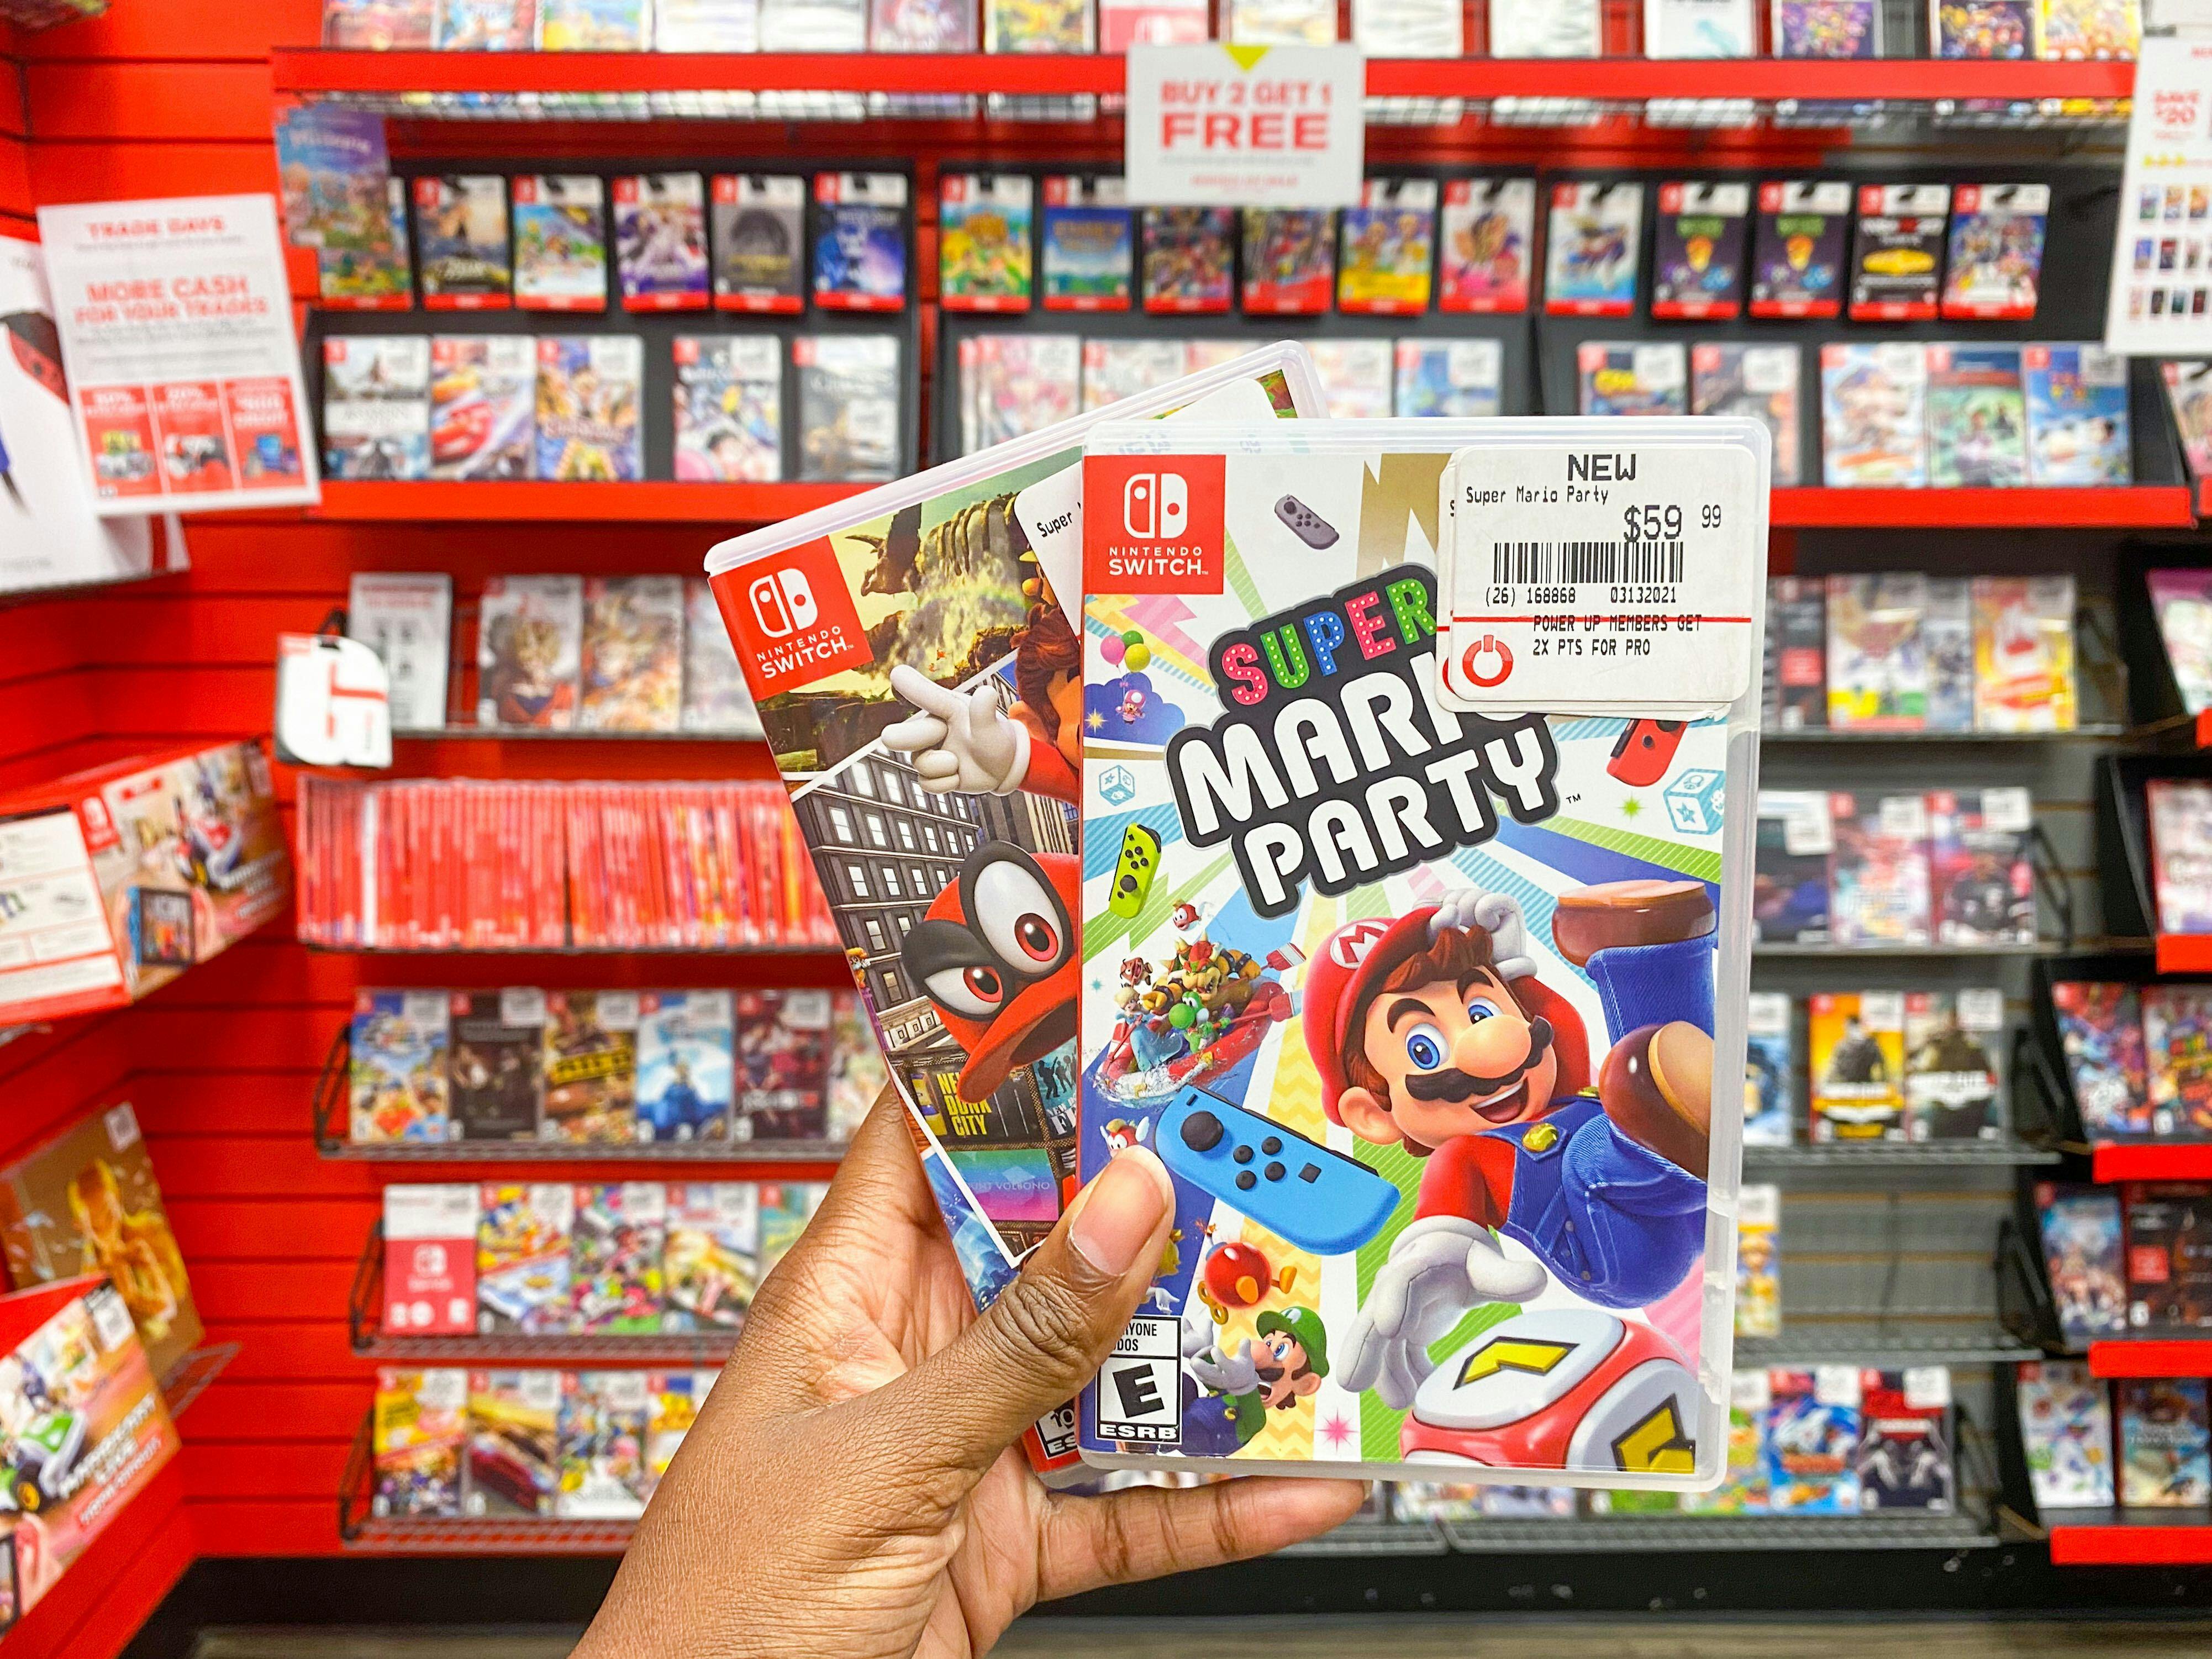 GameStop Return Policy: What to Know - The Krazy Coupon Lady